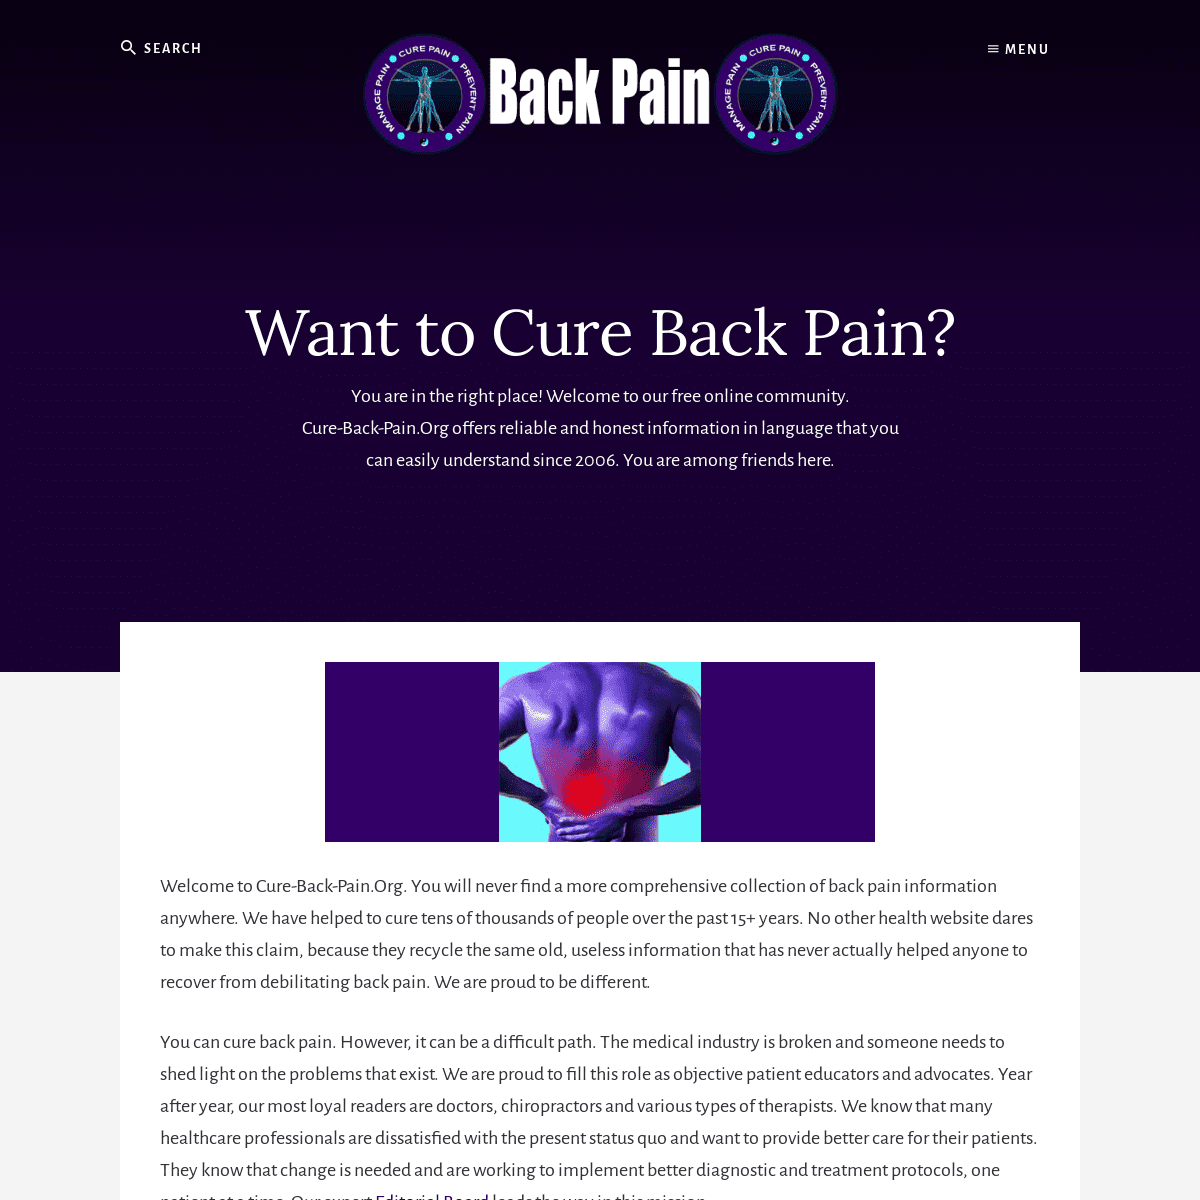 A complete backup of https://cure-back-pain.org